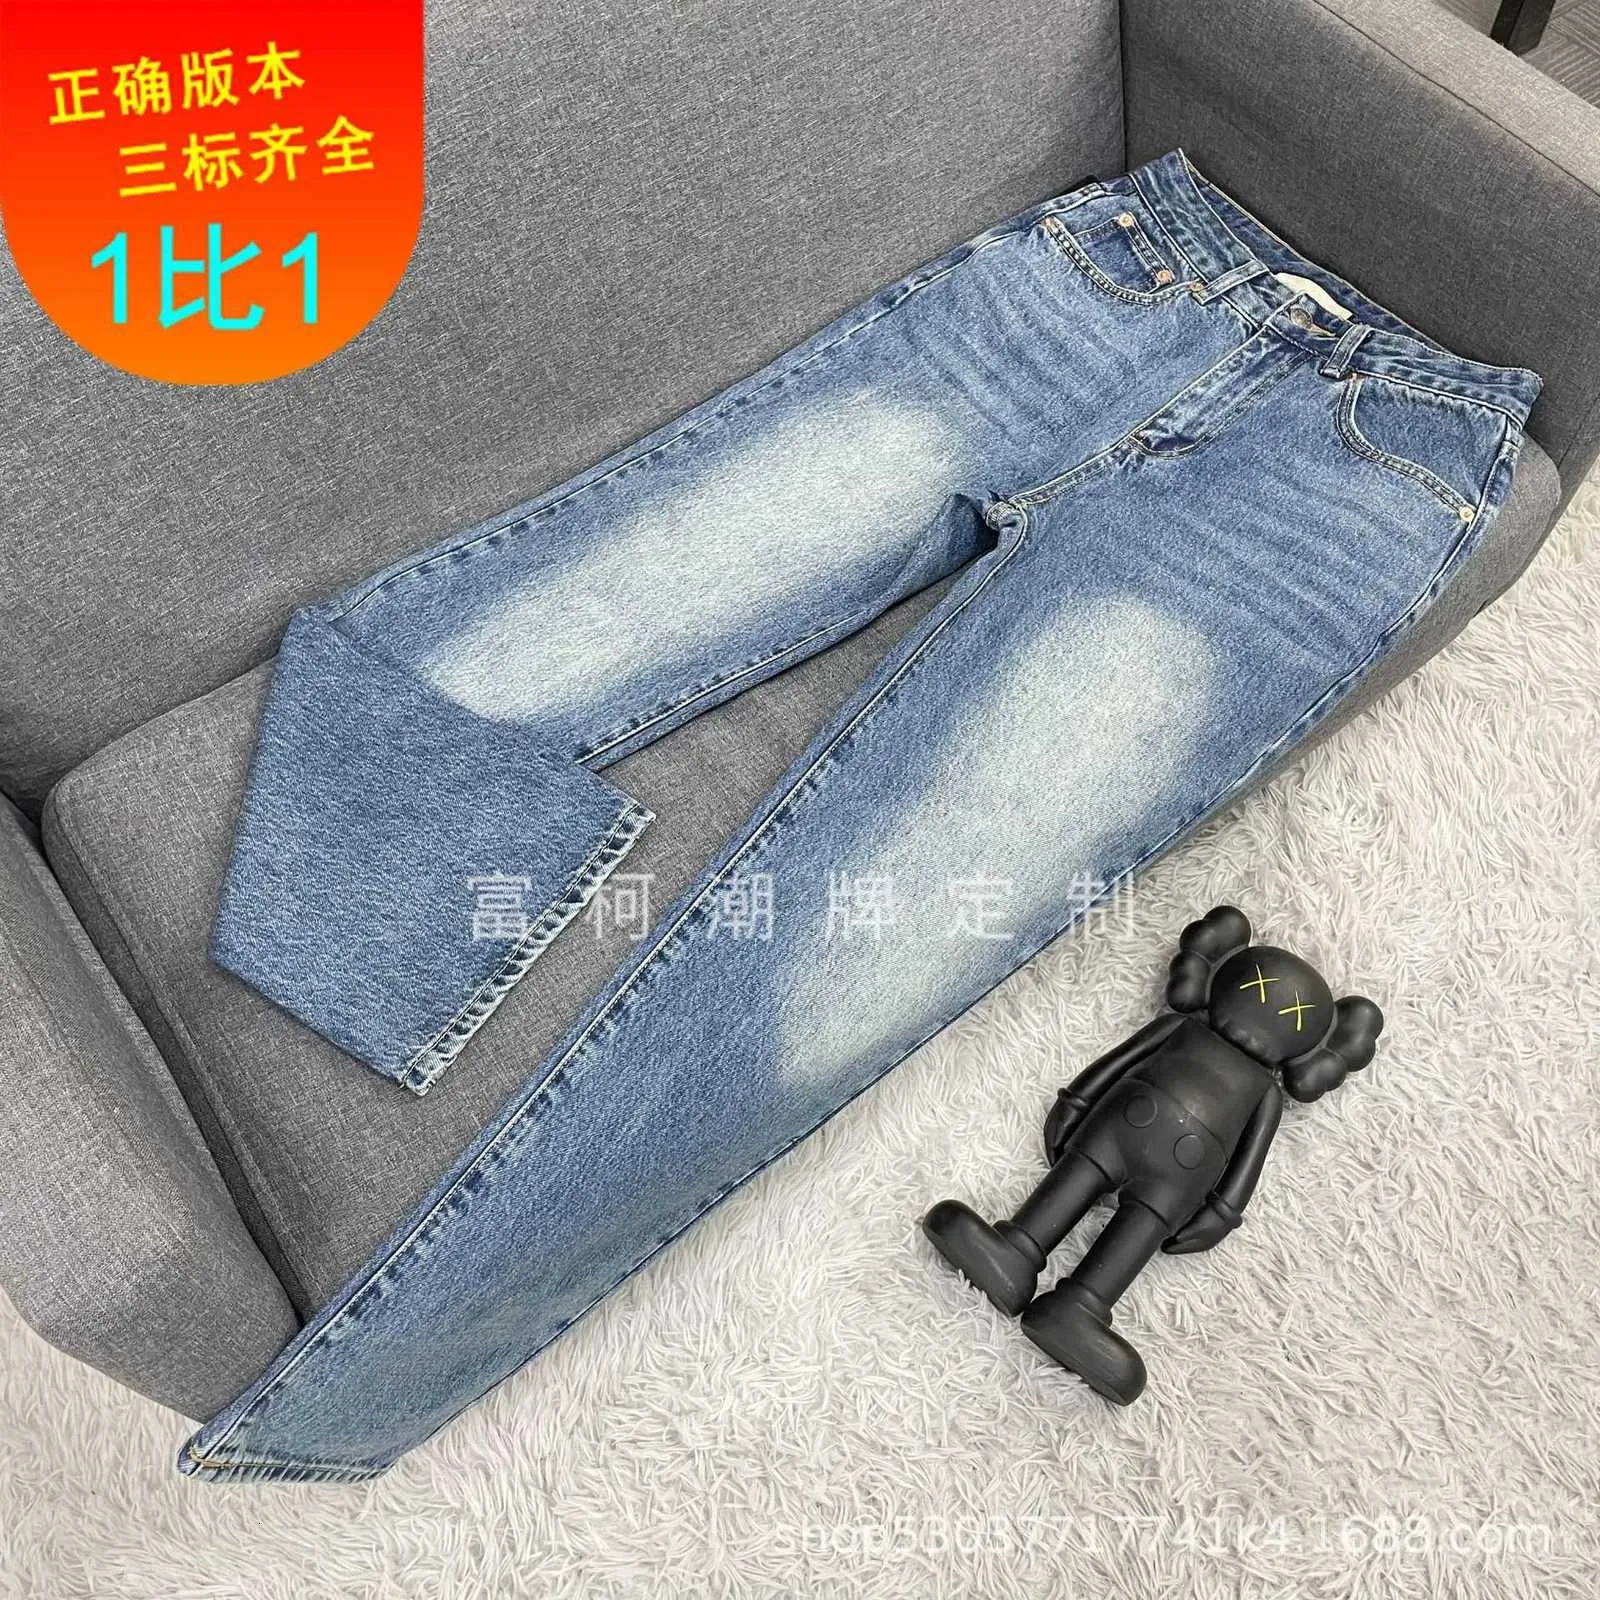 Women's Jeans designer 23 Early spring new back pocket red and green ribbon chain horse street buckle high waist straight jeans woman SAAB